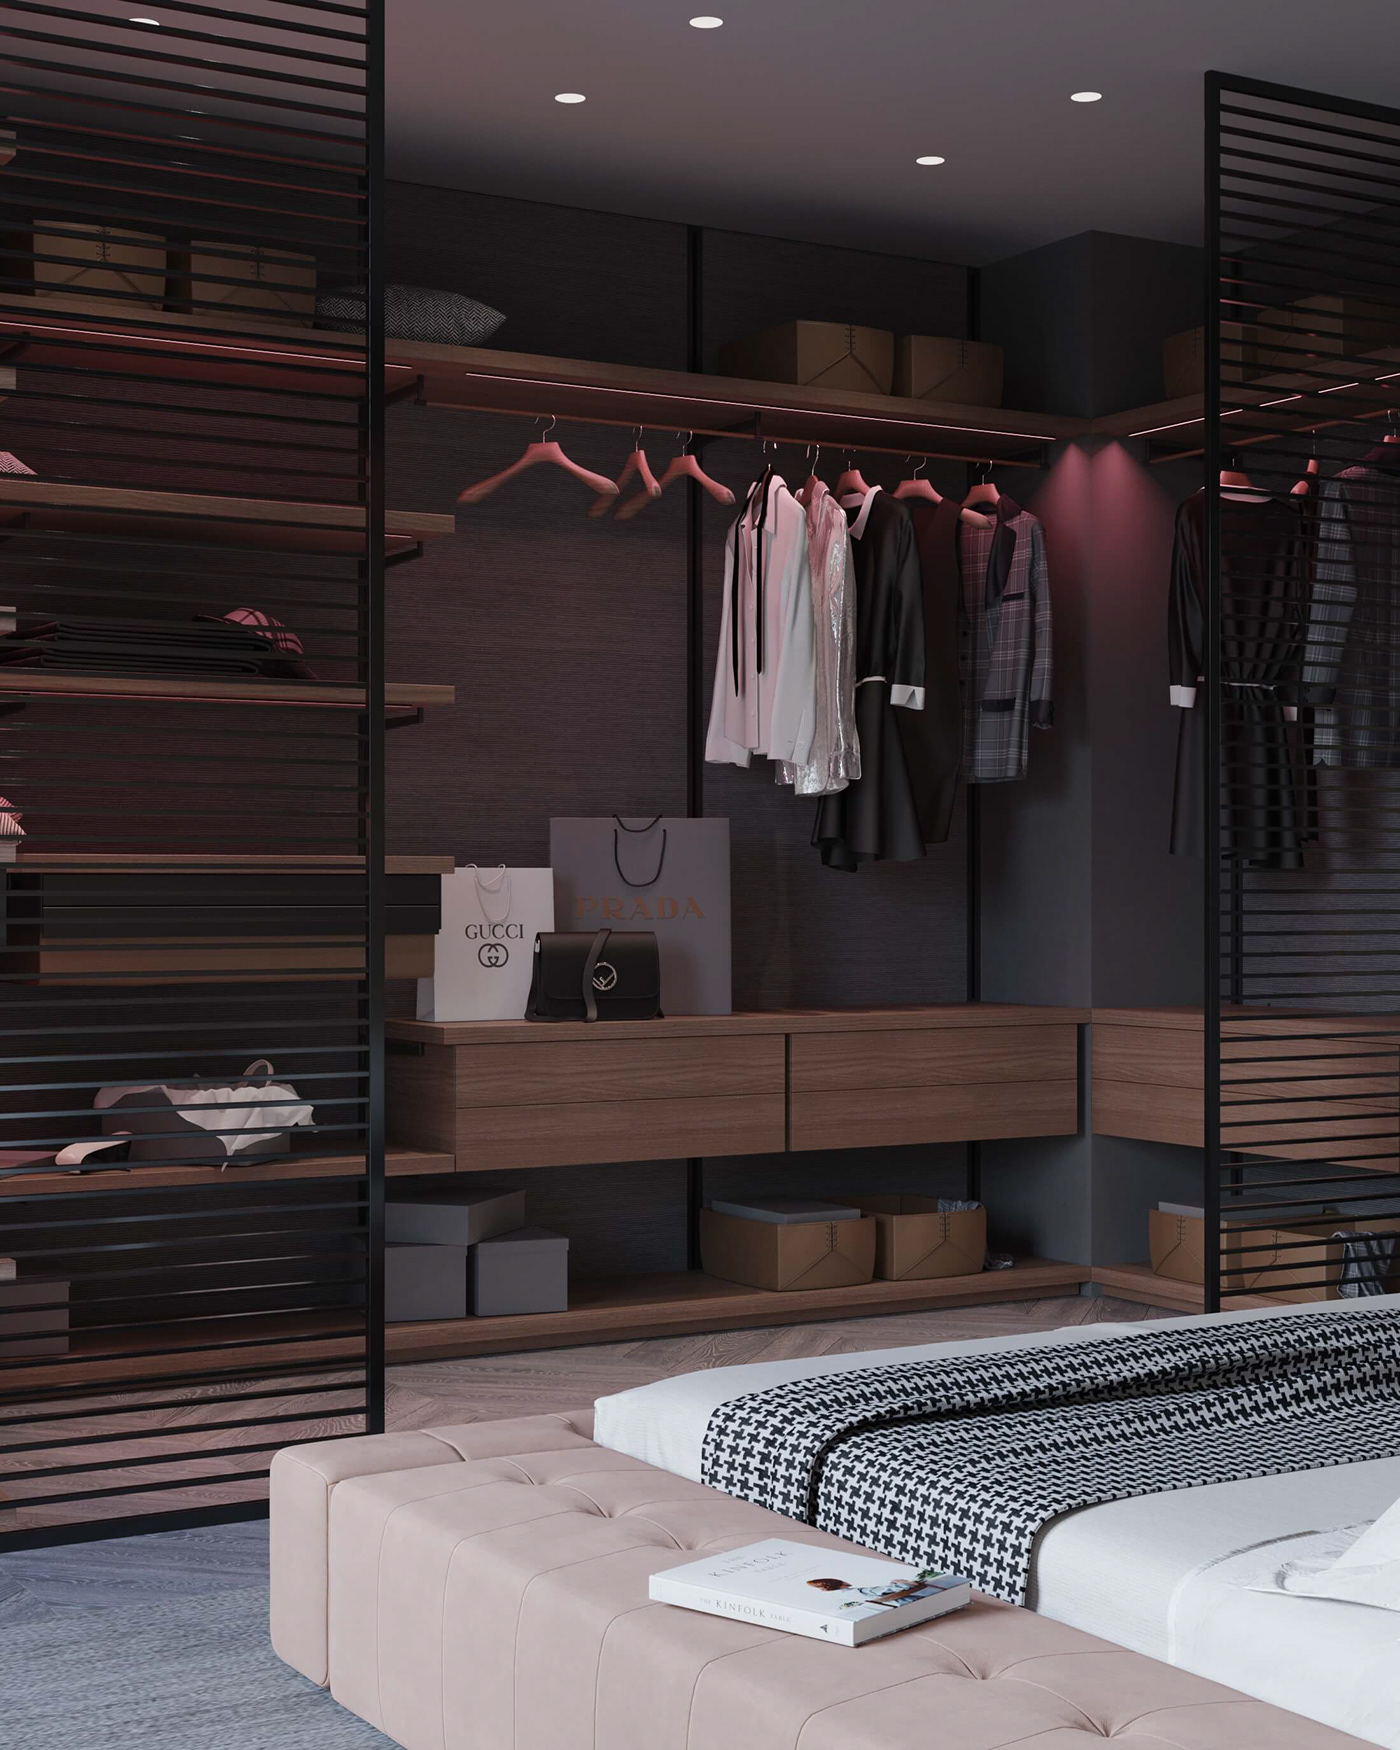 Large wardrobe is also a place to store other things.